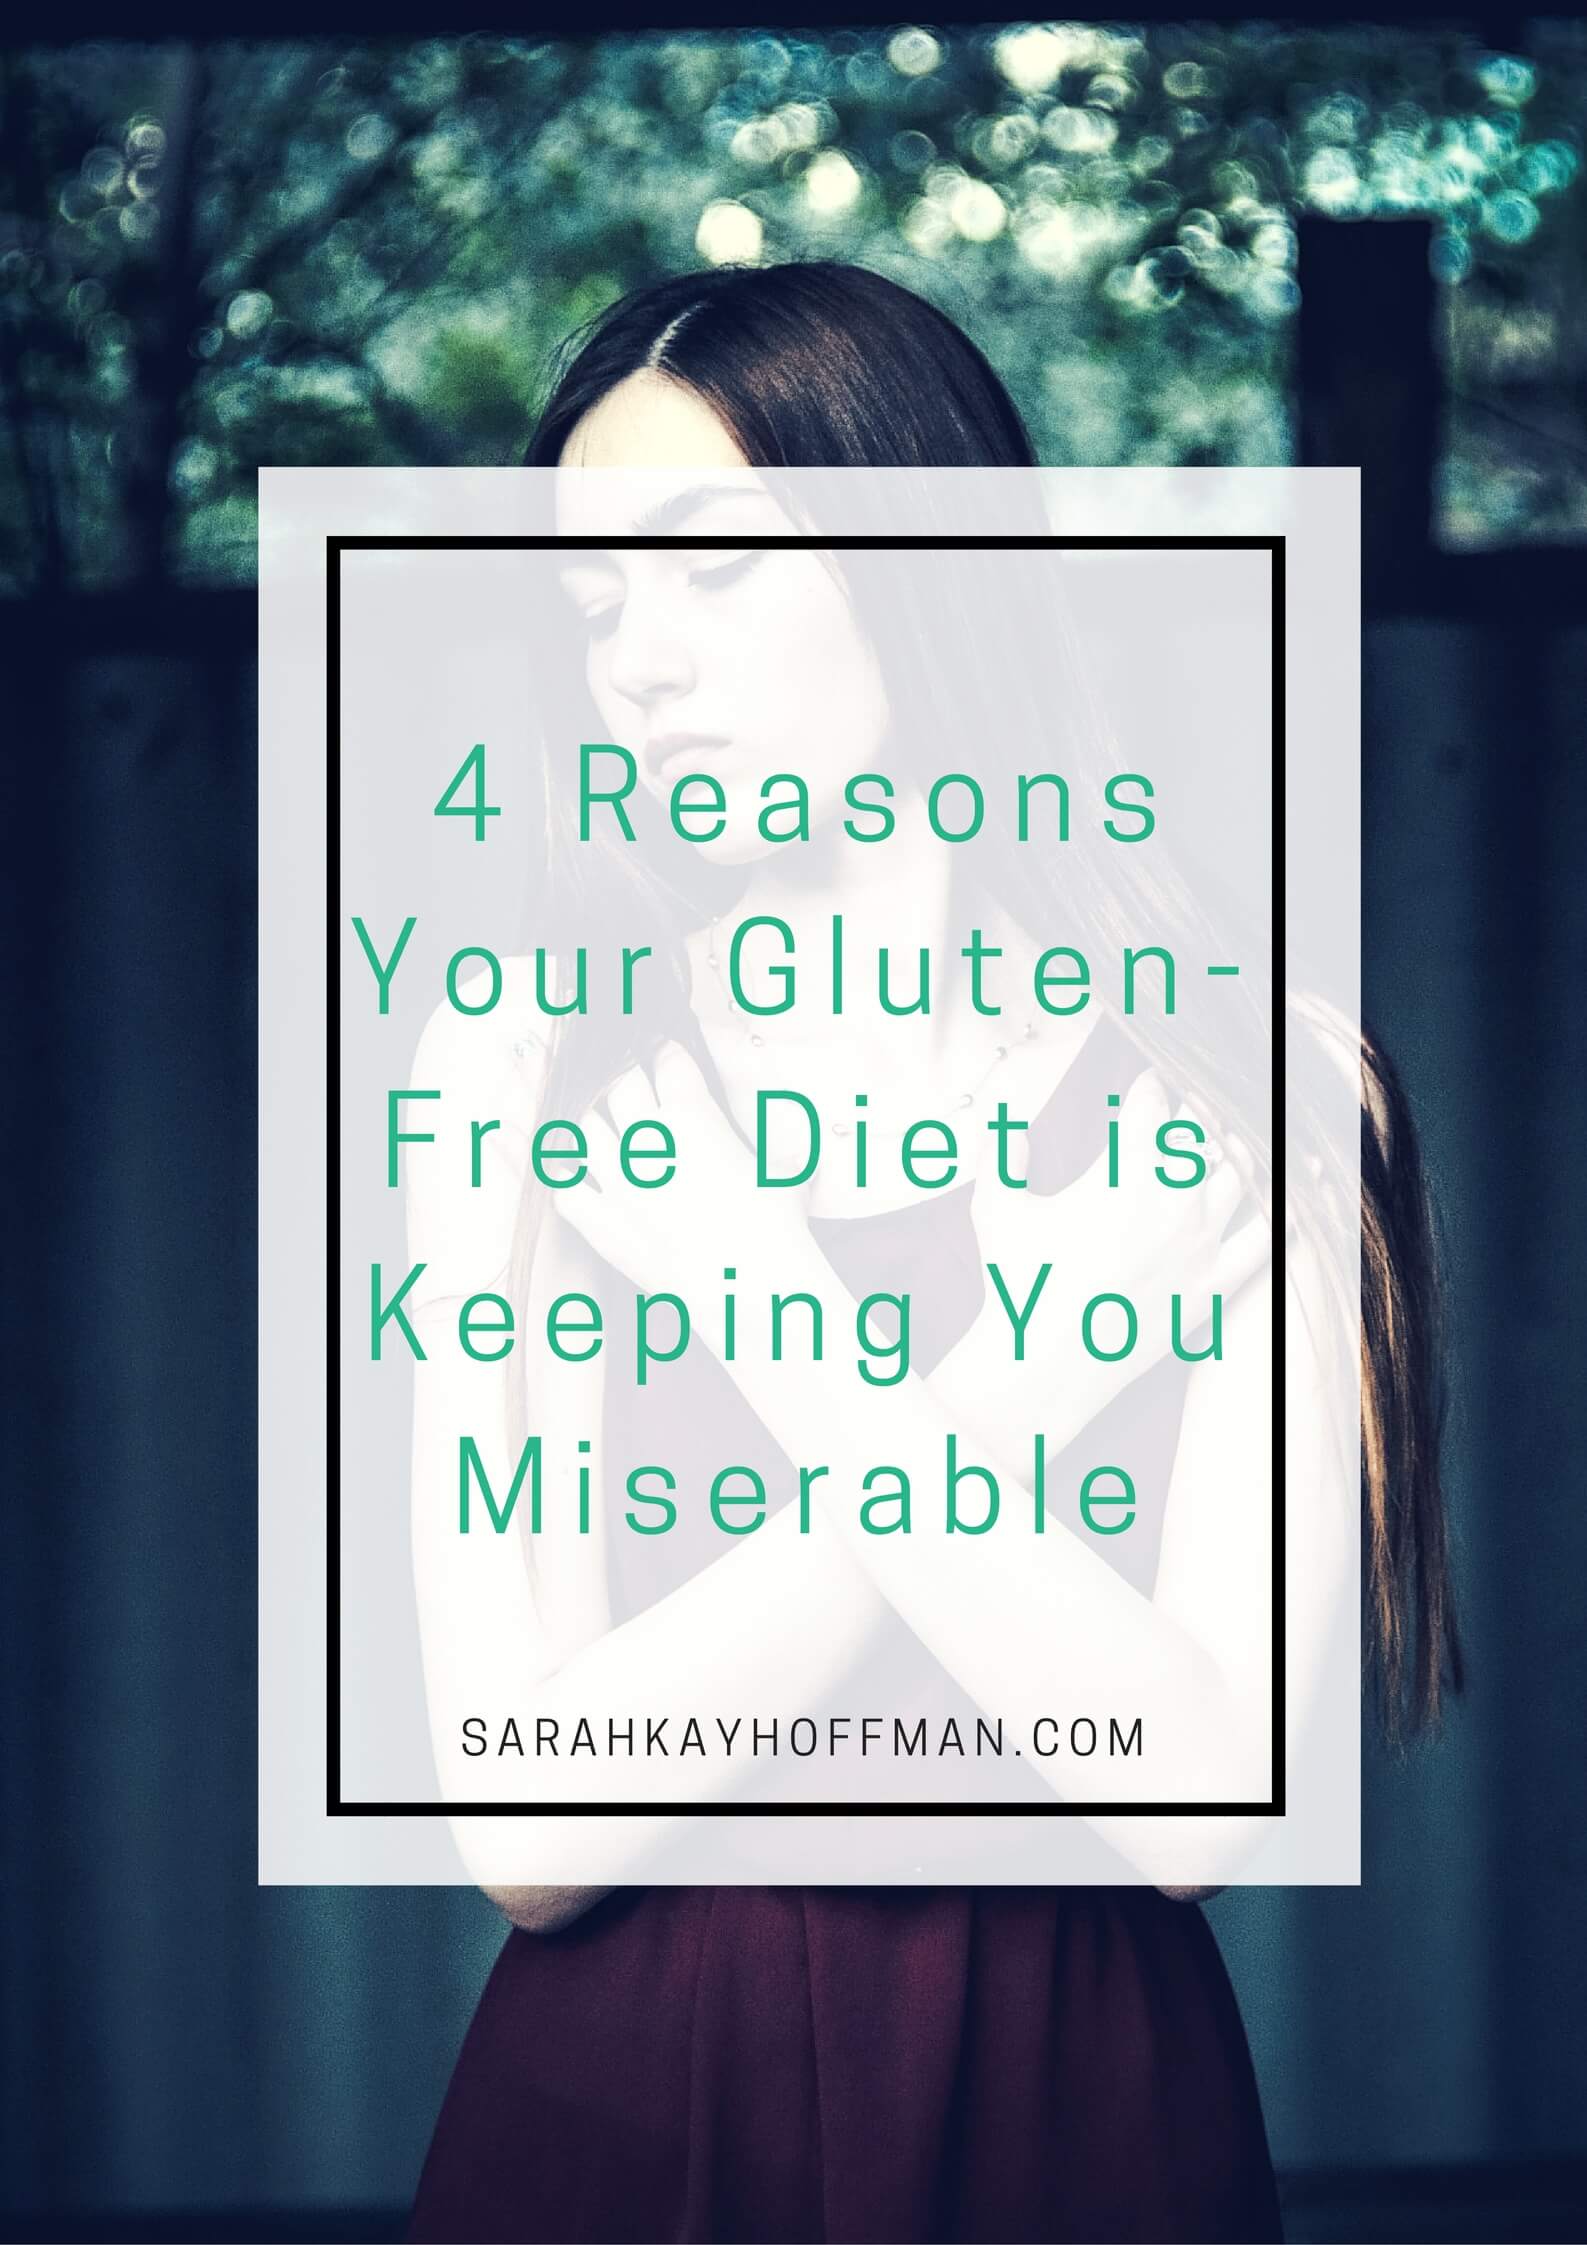 4 Reasons Your Gluten-Free Diet is Keeping You Miserable sarahkayhoffman.com #glutenfree #healthyliving #guthealth